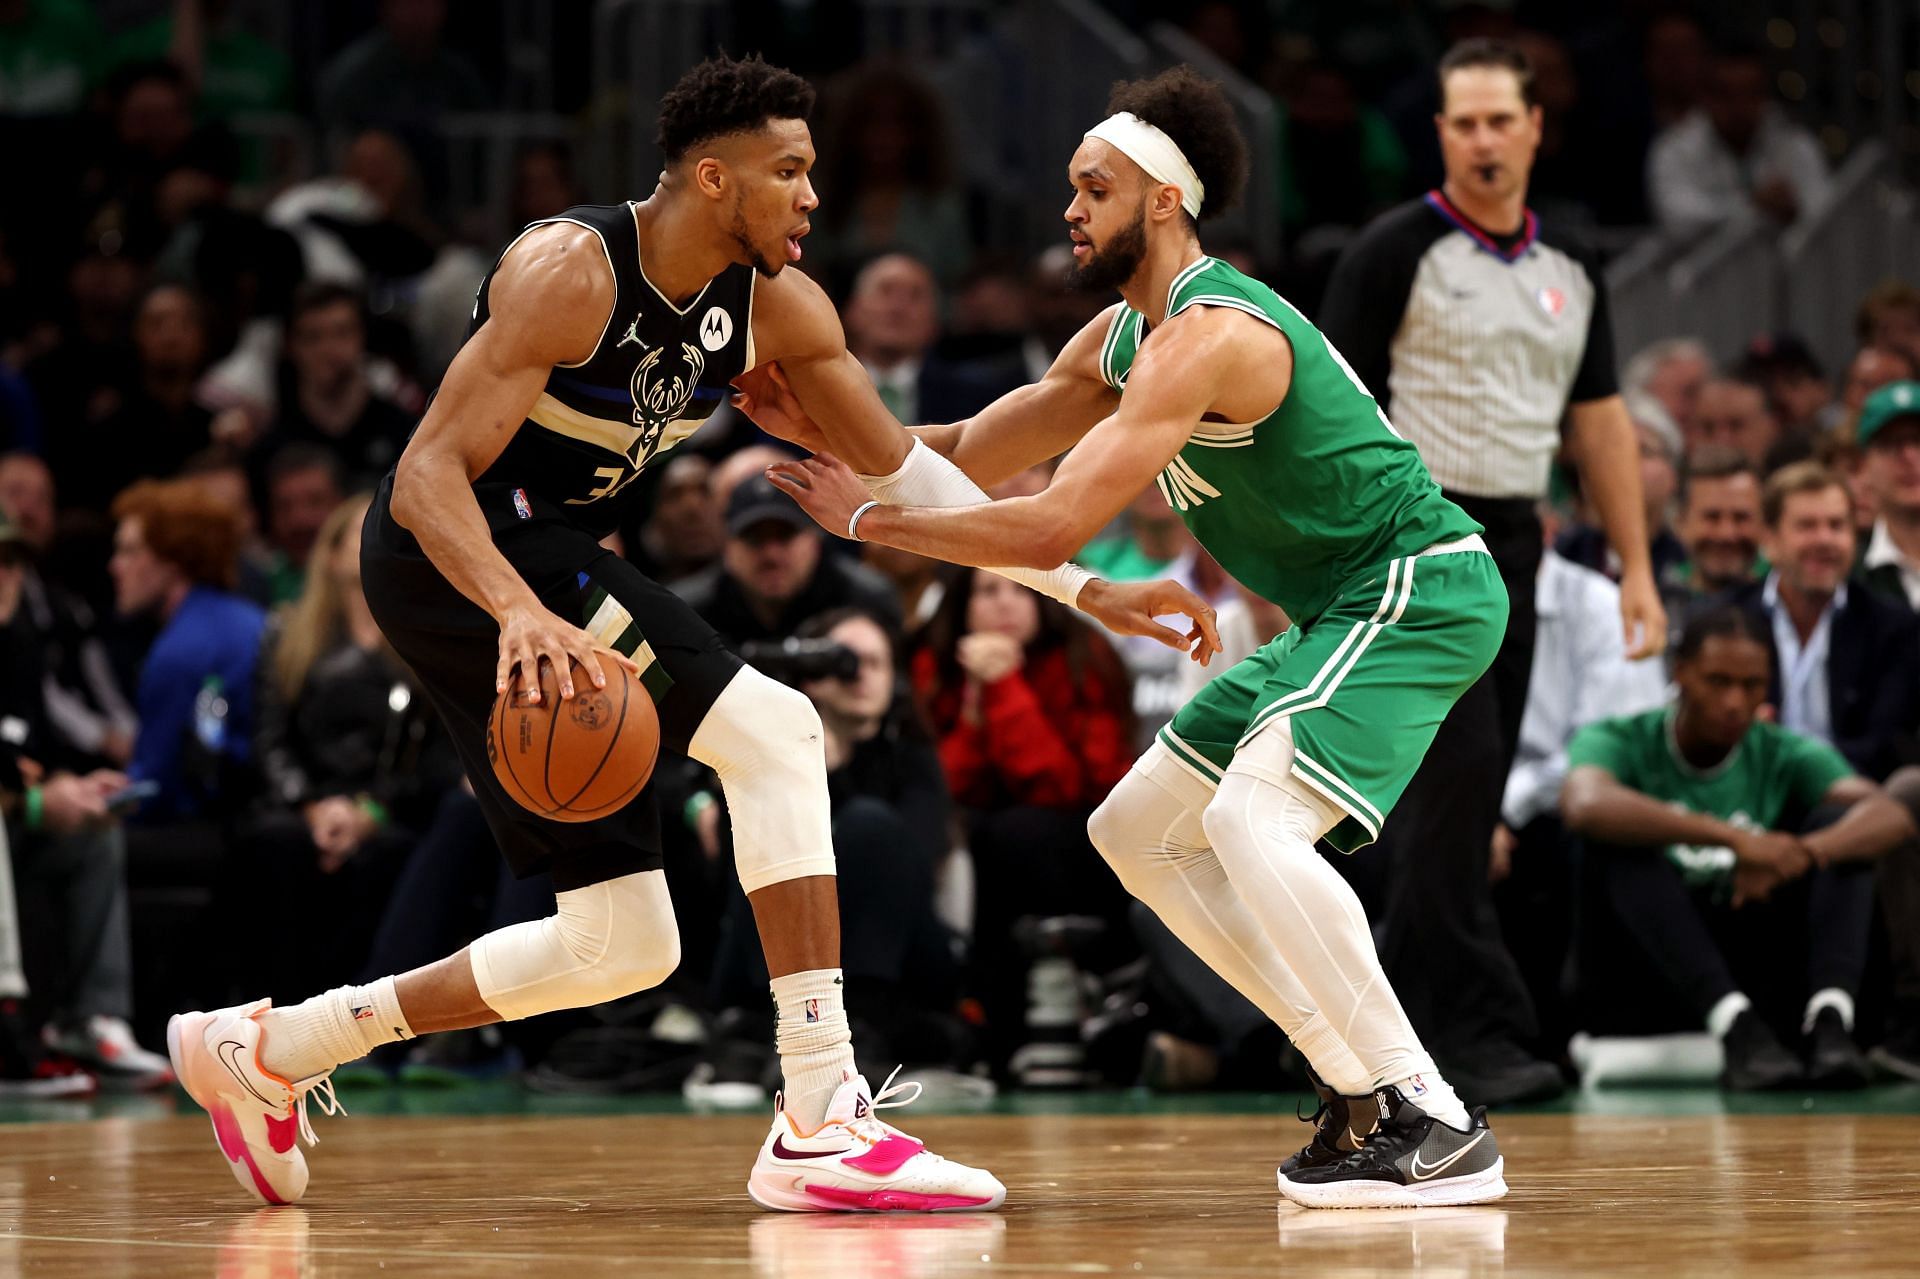 Two crunch-time layups from Giannis Antetokounmpo and Jrue Holiday pushed the Bucks past the Celtics on Saturday.